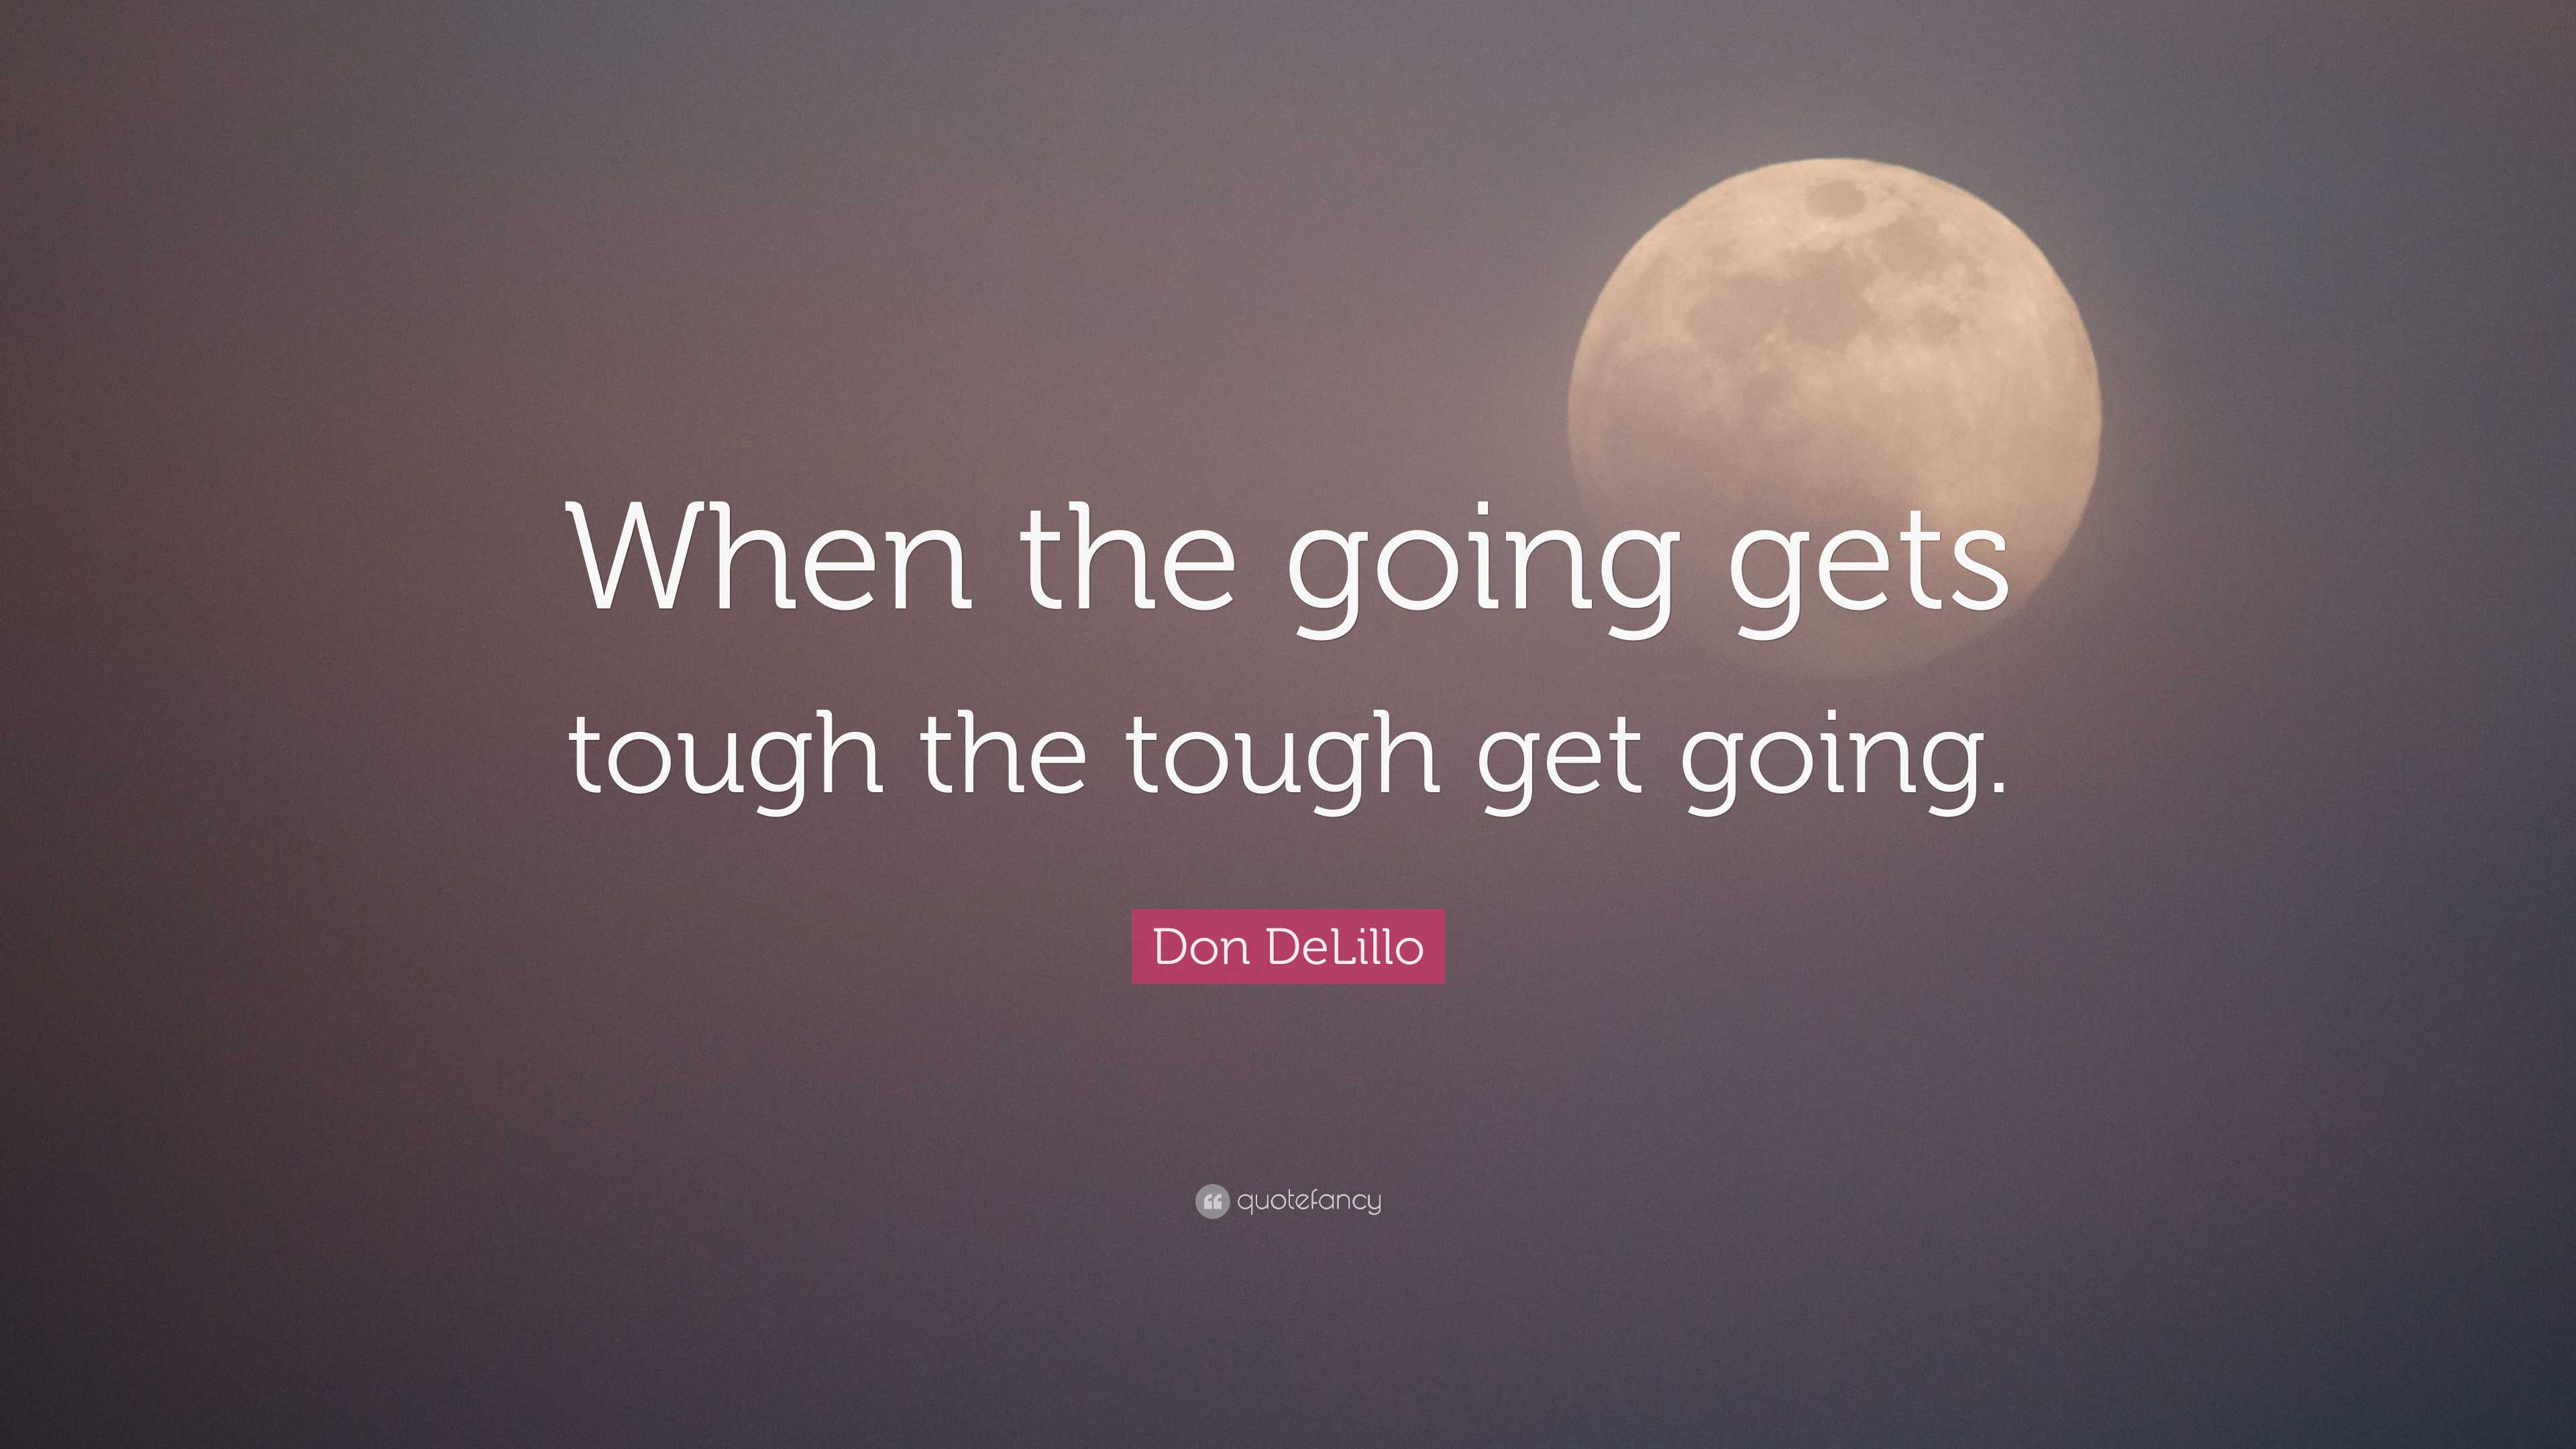 7693417 Don DeLillo Quote When The Going Gets Tough The Tough Get Going 